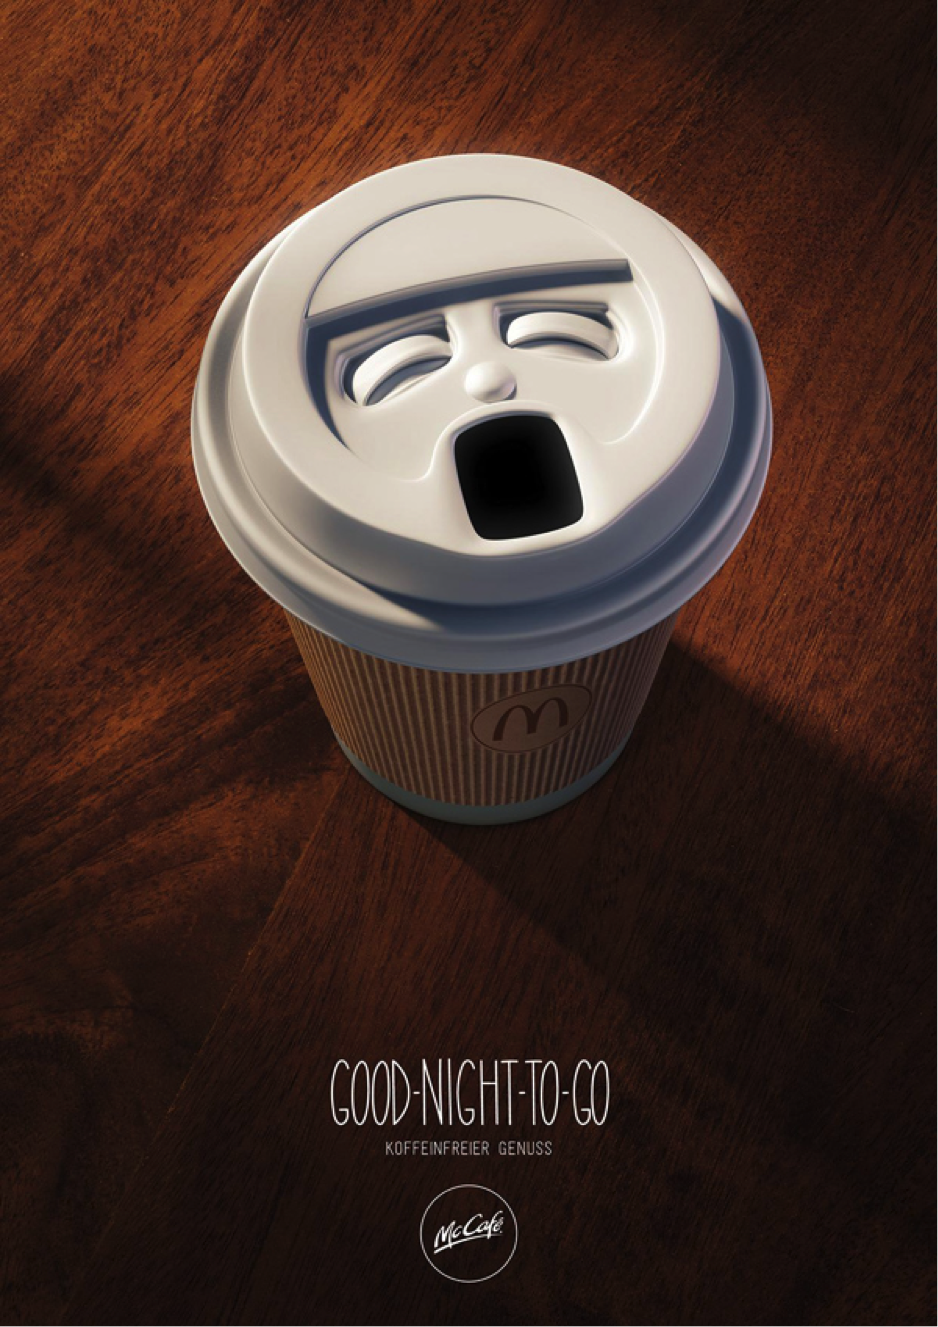 McCafe coffee cup advertisement 